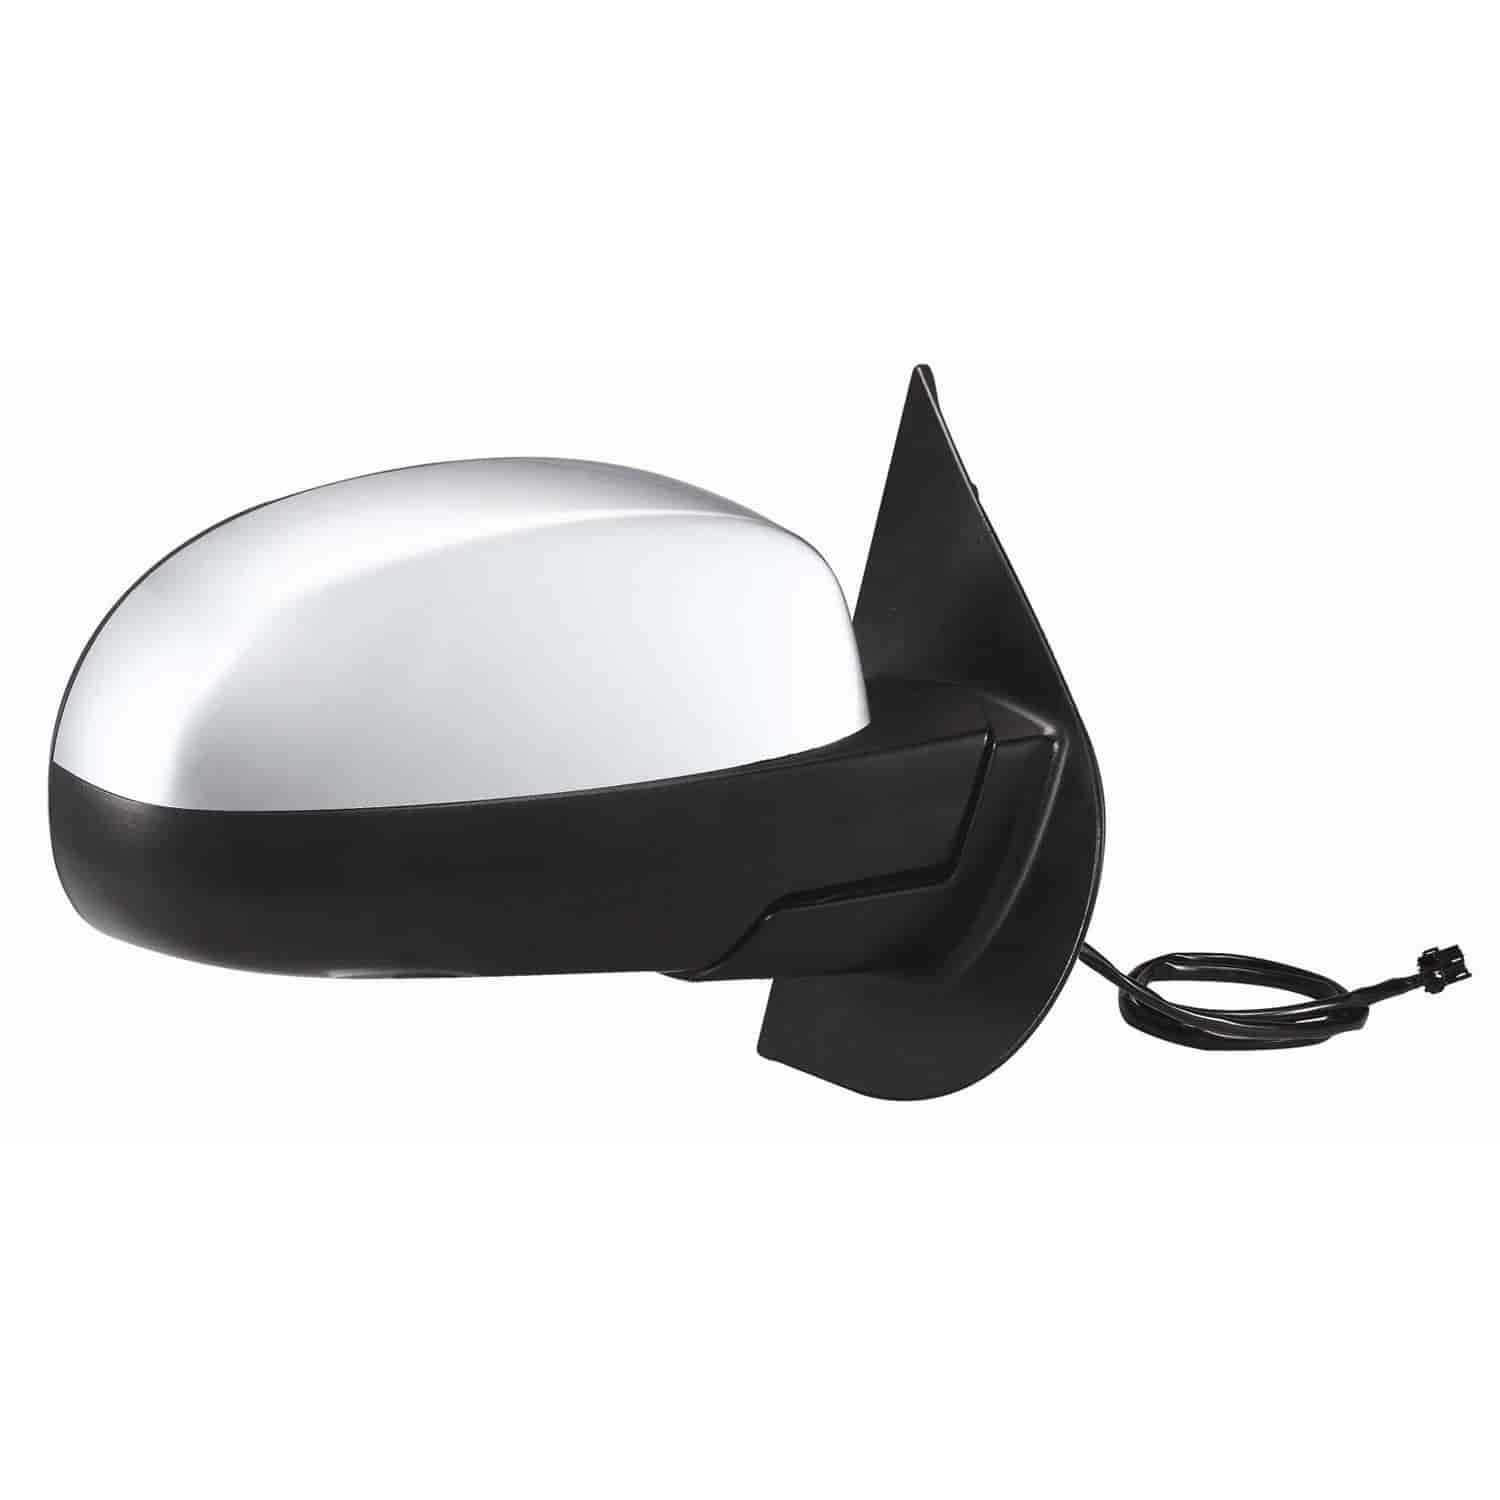 OEM Style Replacement mirror for Repl OEM Style Mirror for 07-13 Avalanche Silver/ Sierra 150007-14